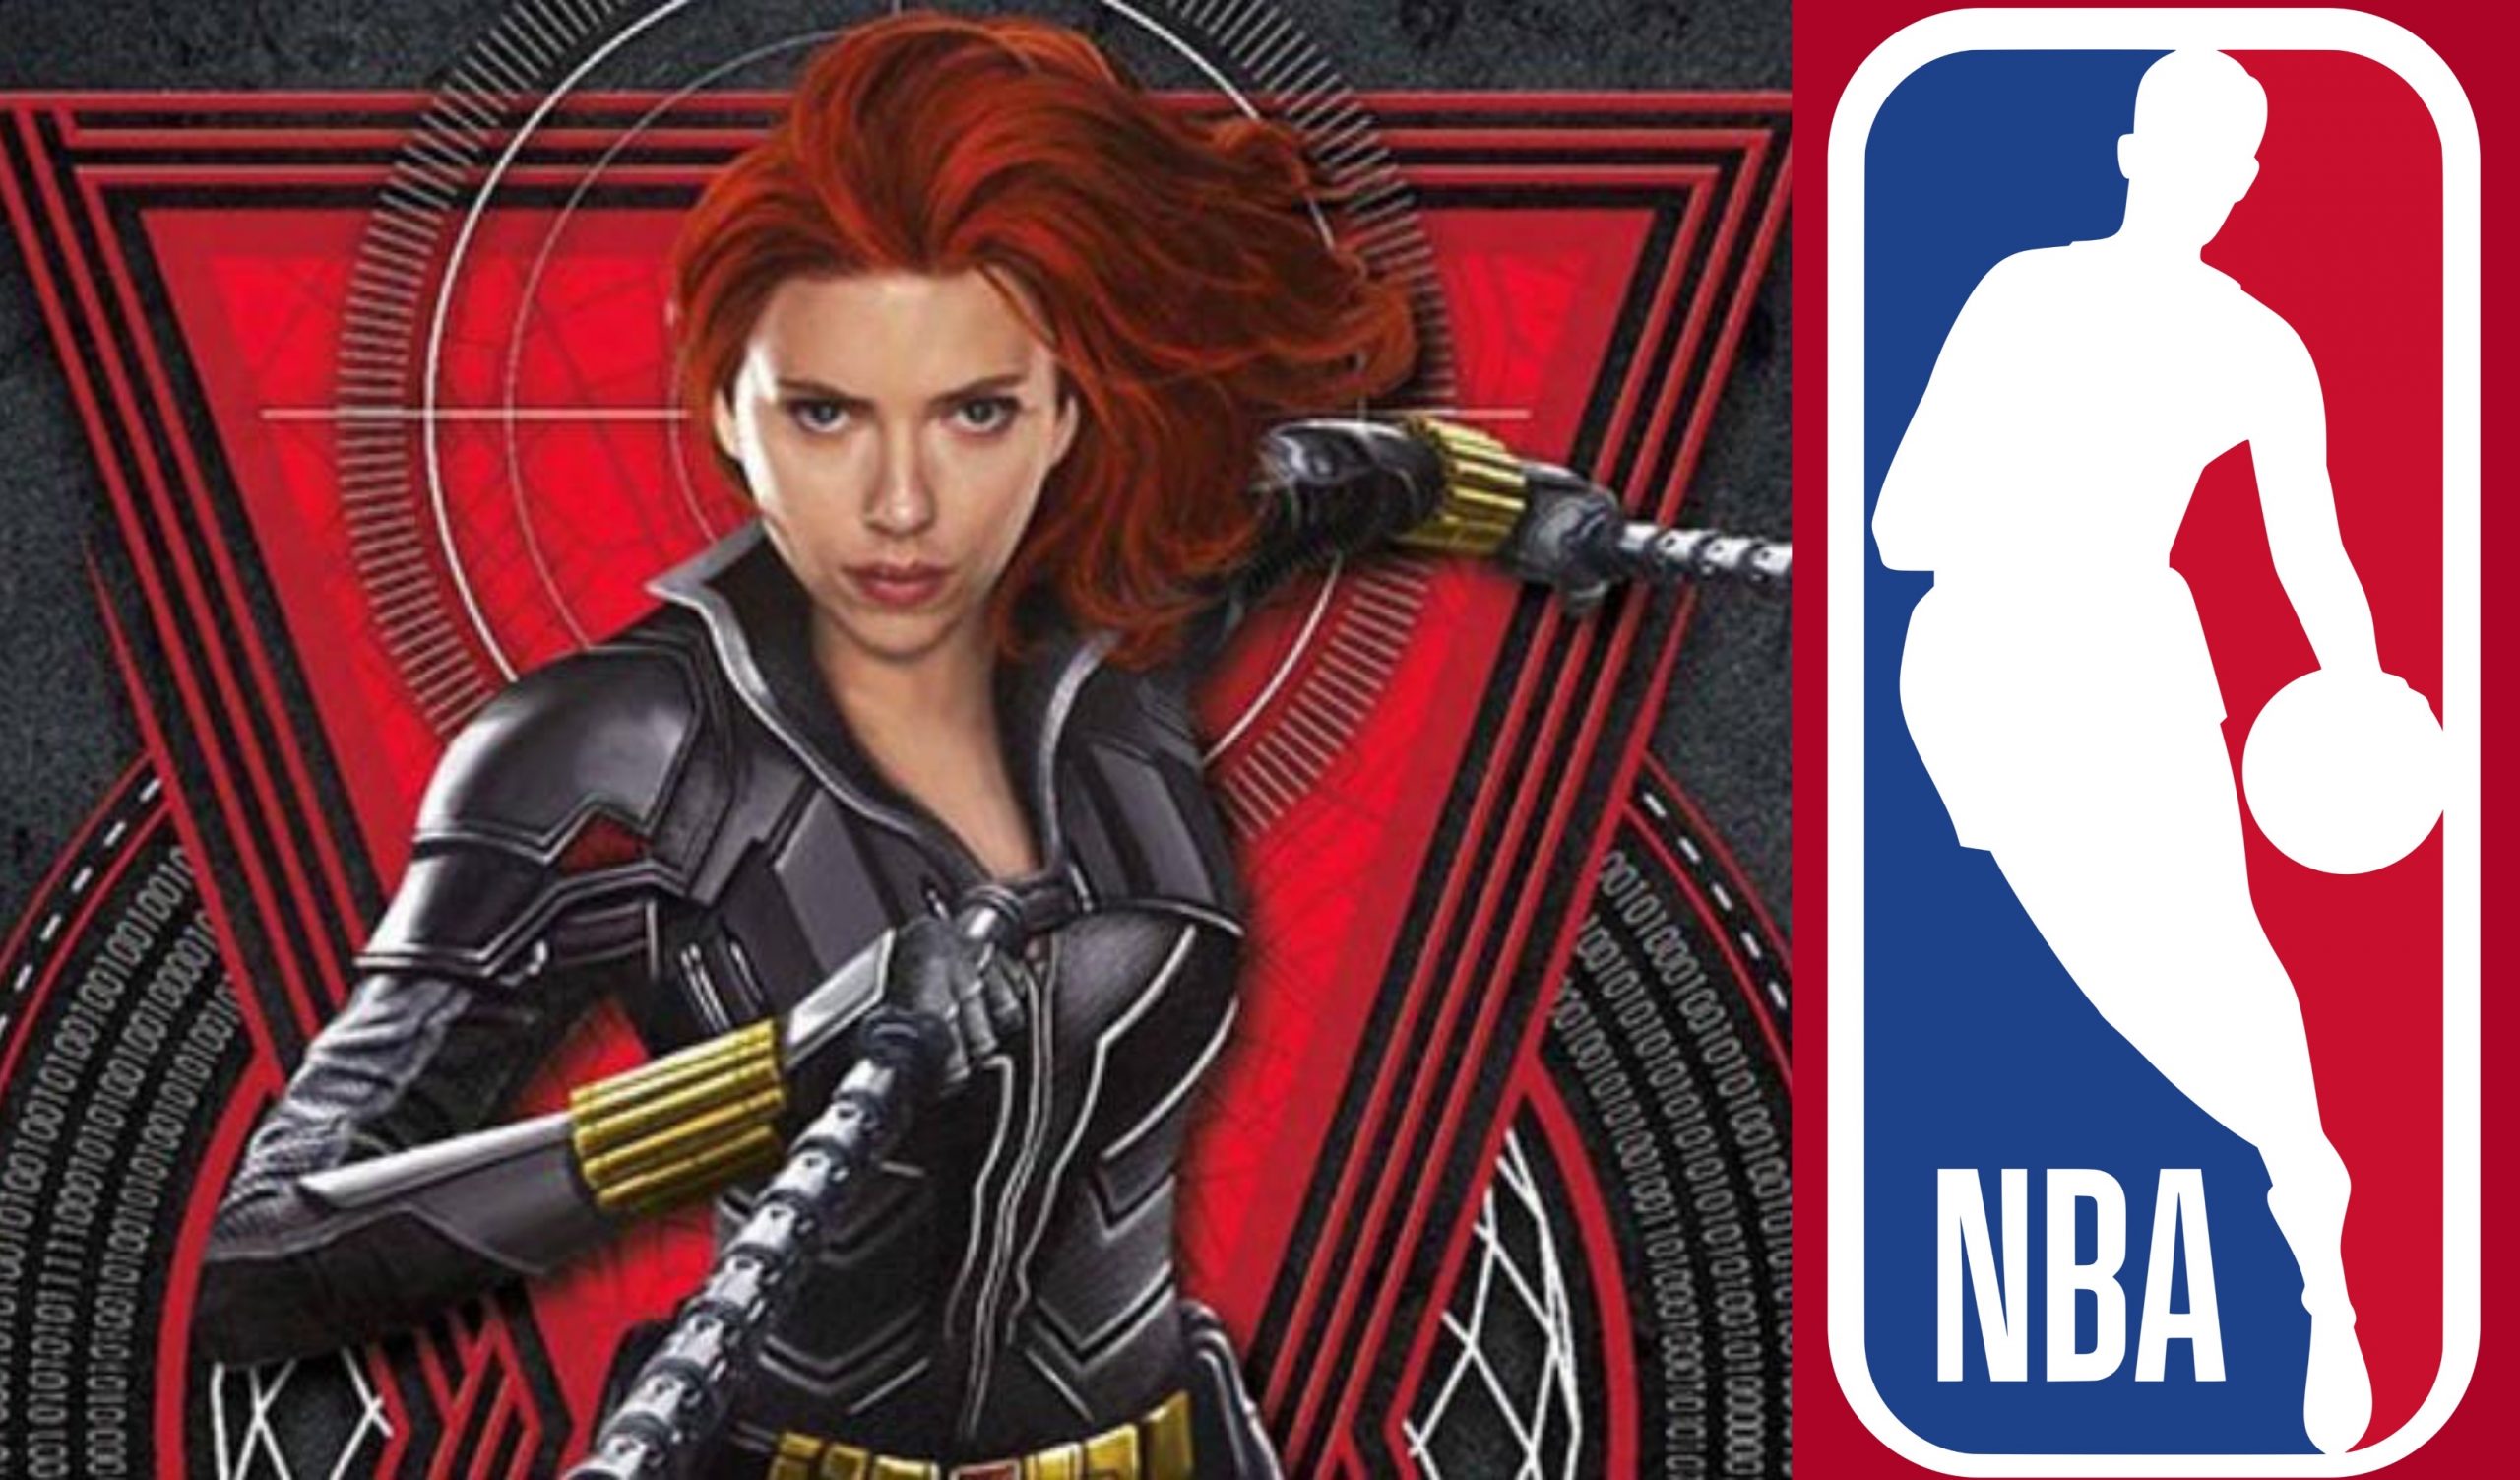 Disney May Show Early Screening of Marvel Studios’ Black Widow to NBA Players and Their Families